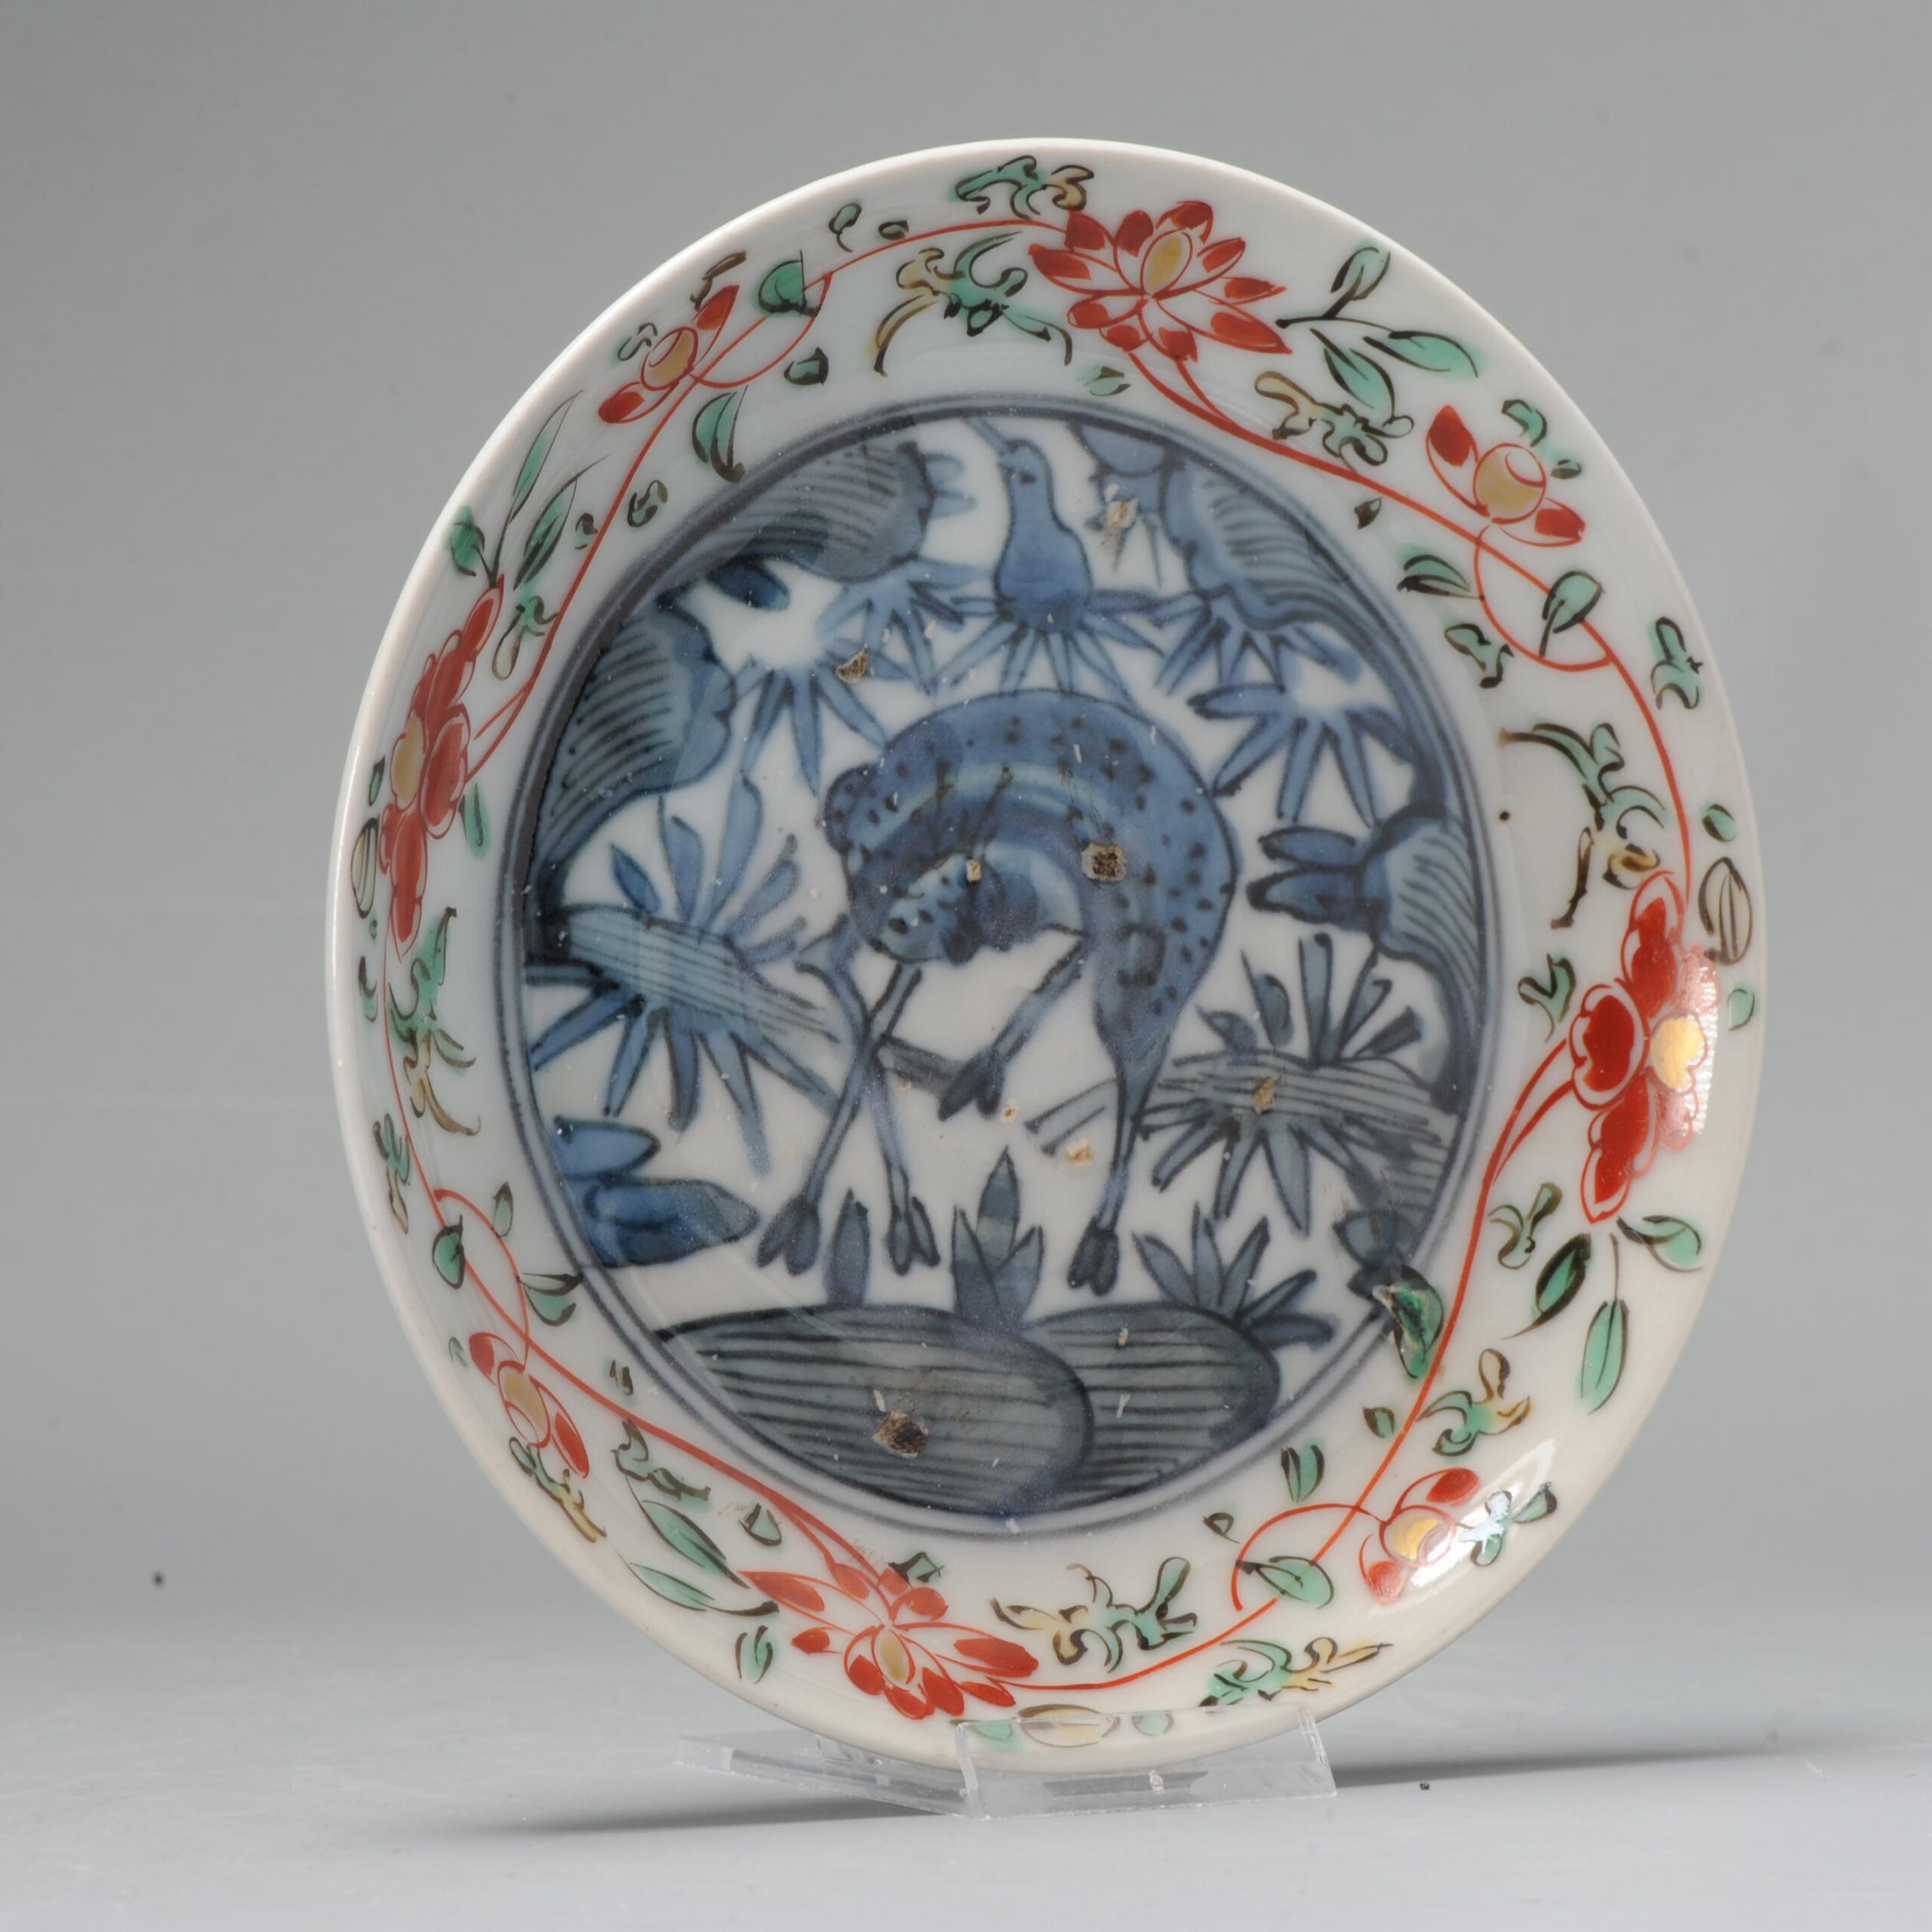 Antique Japanese Arita Porcelain Dish with added colors and Deer 18/19C Japan